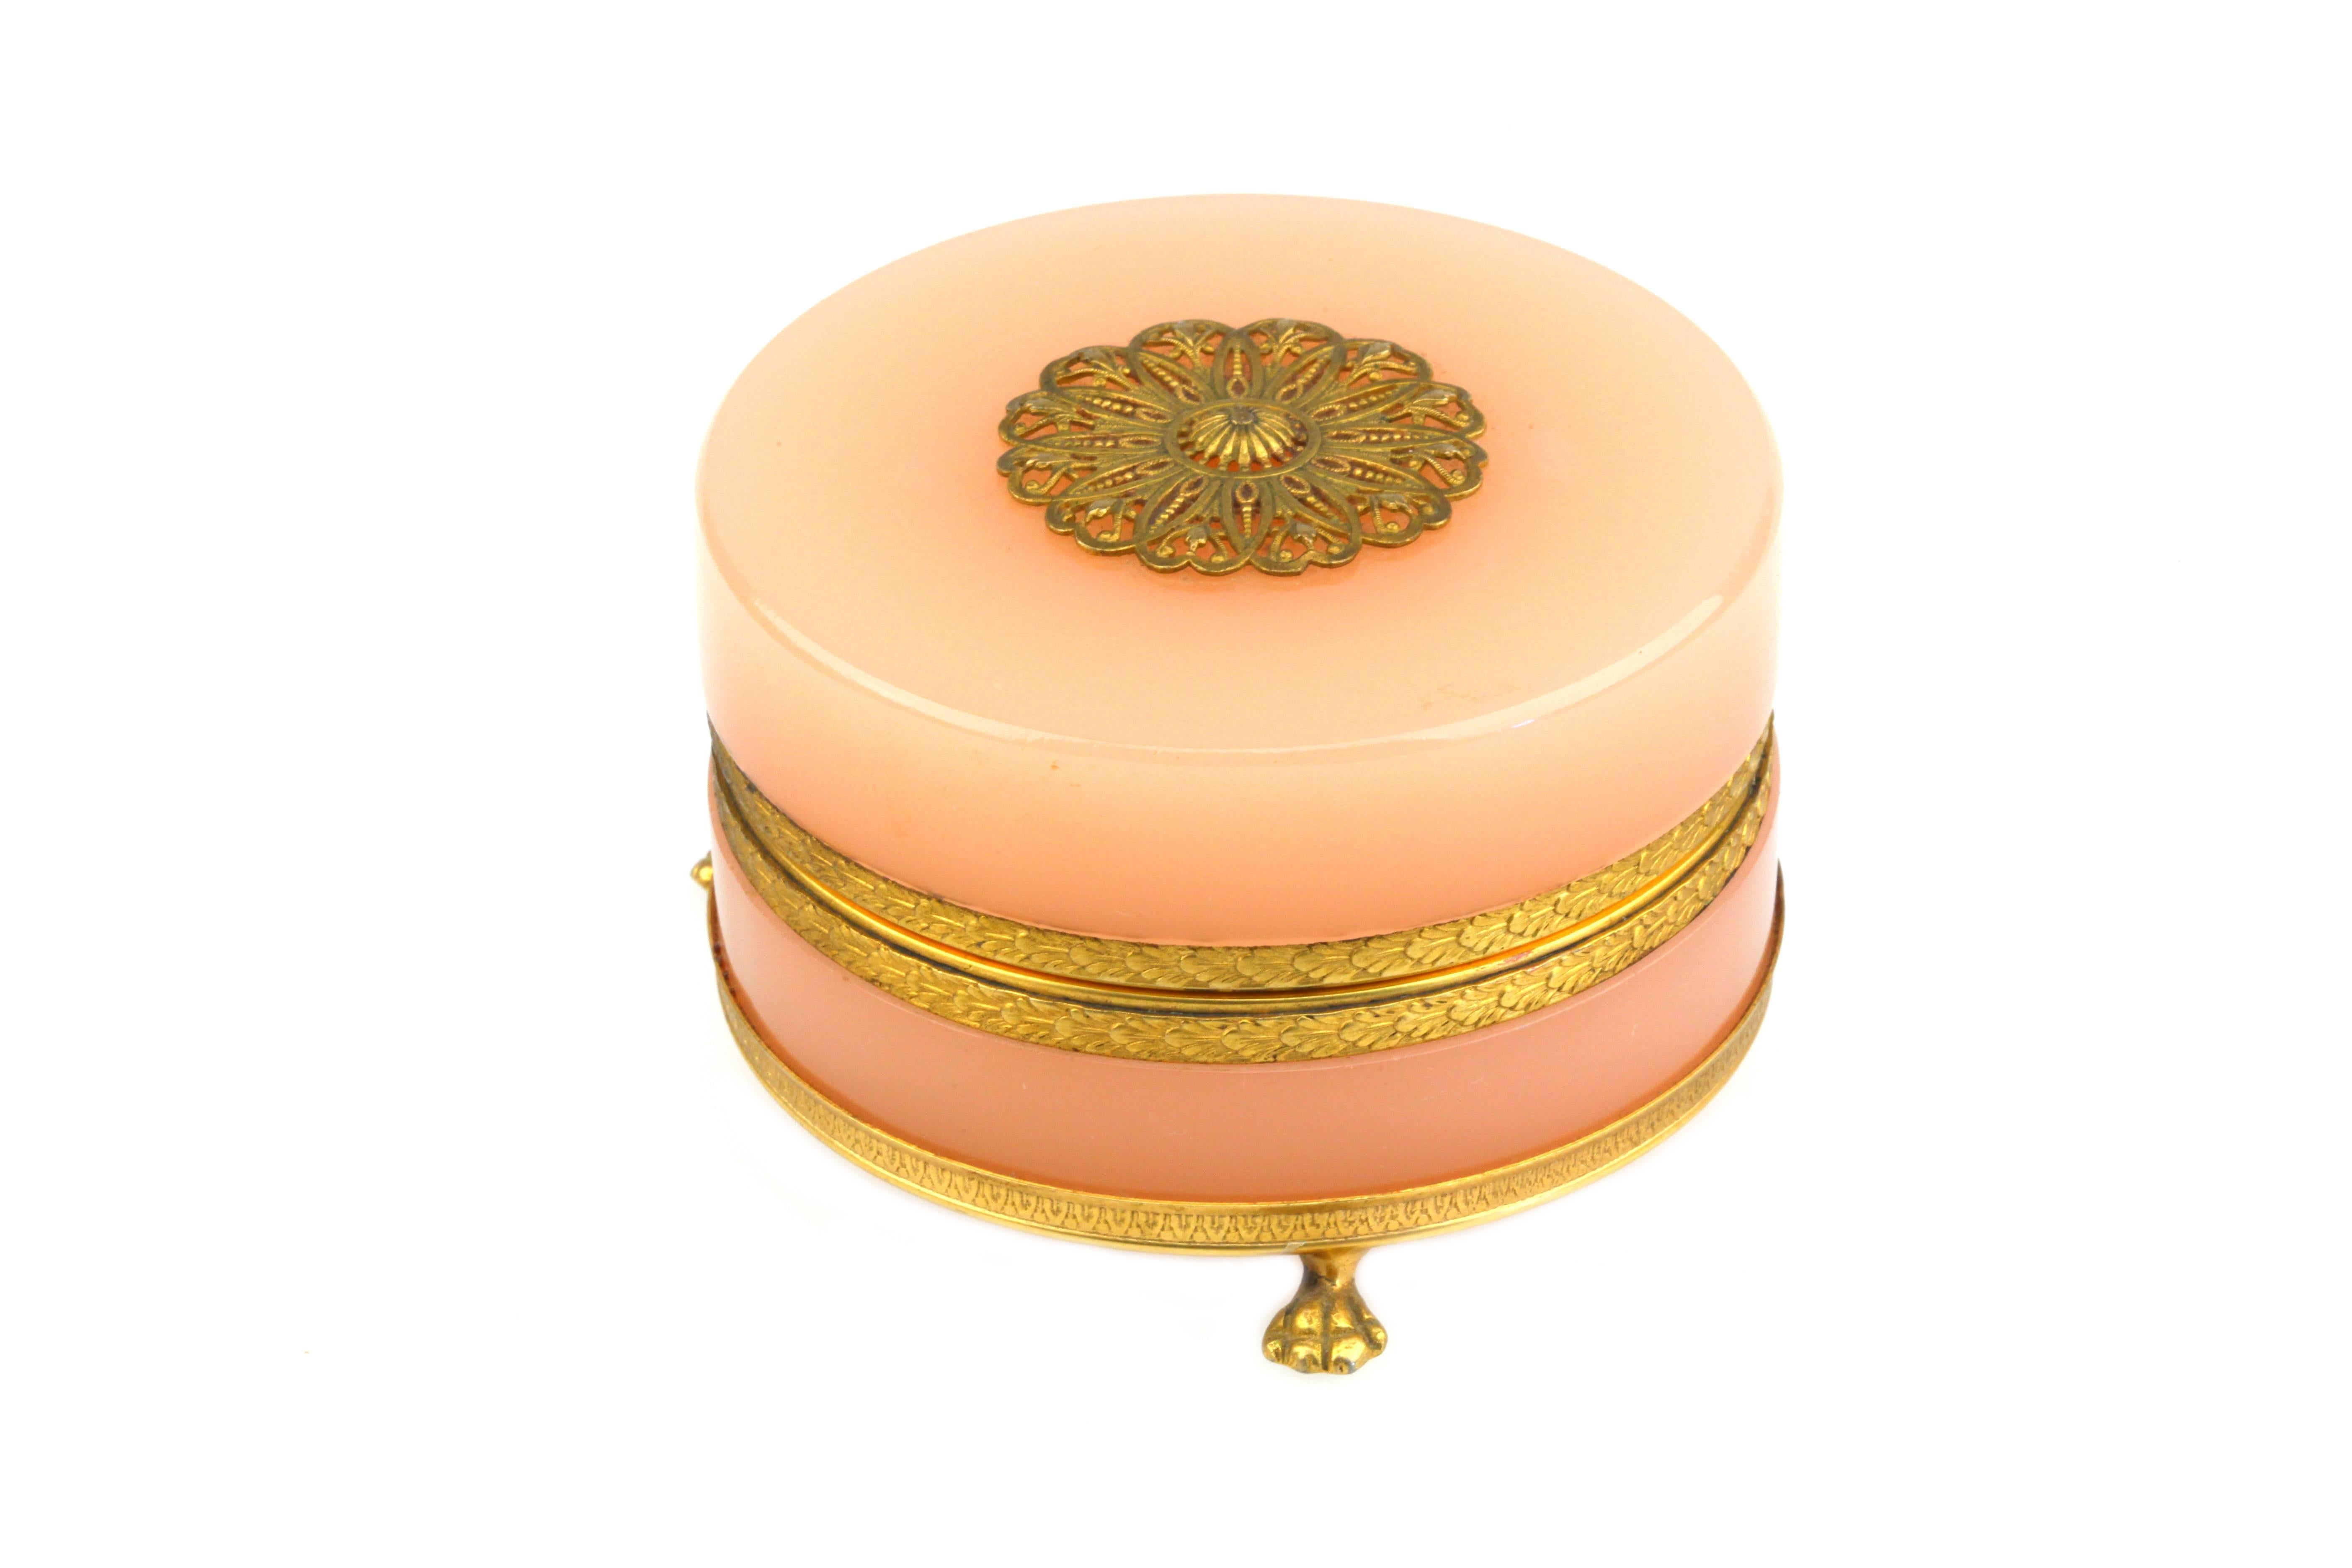 Murano glass old rose / pink opaline crystal glass trinket or jewelry box. Whinged lid and bronze doré mounts, early 20th century.
Is in excellent condition.

Measures: Height 6 cm / 2.4 inch,
diameter 10.5 cm / 4.1 inch.